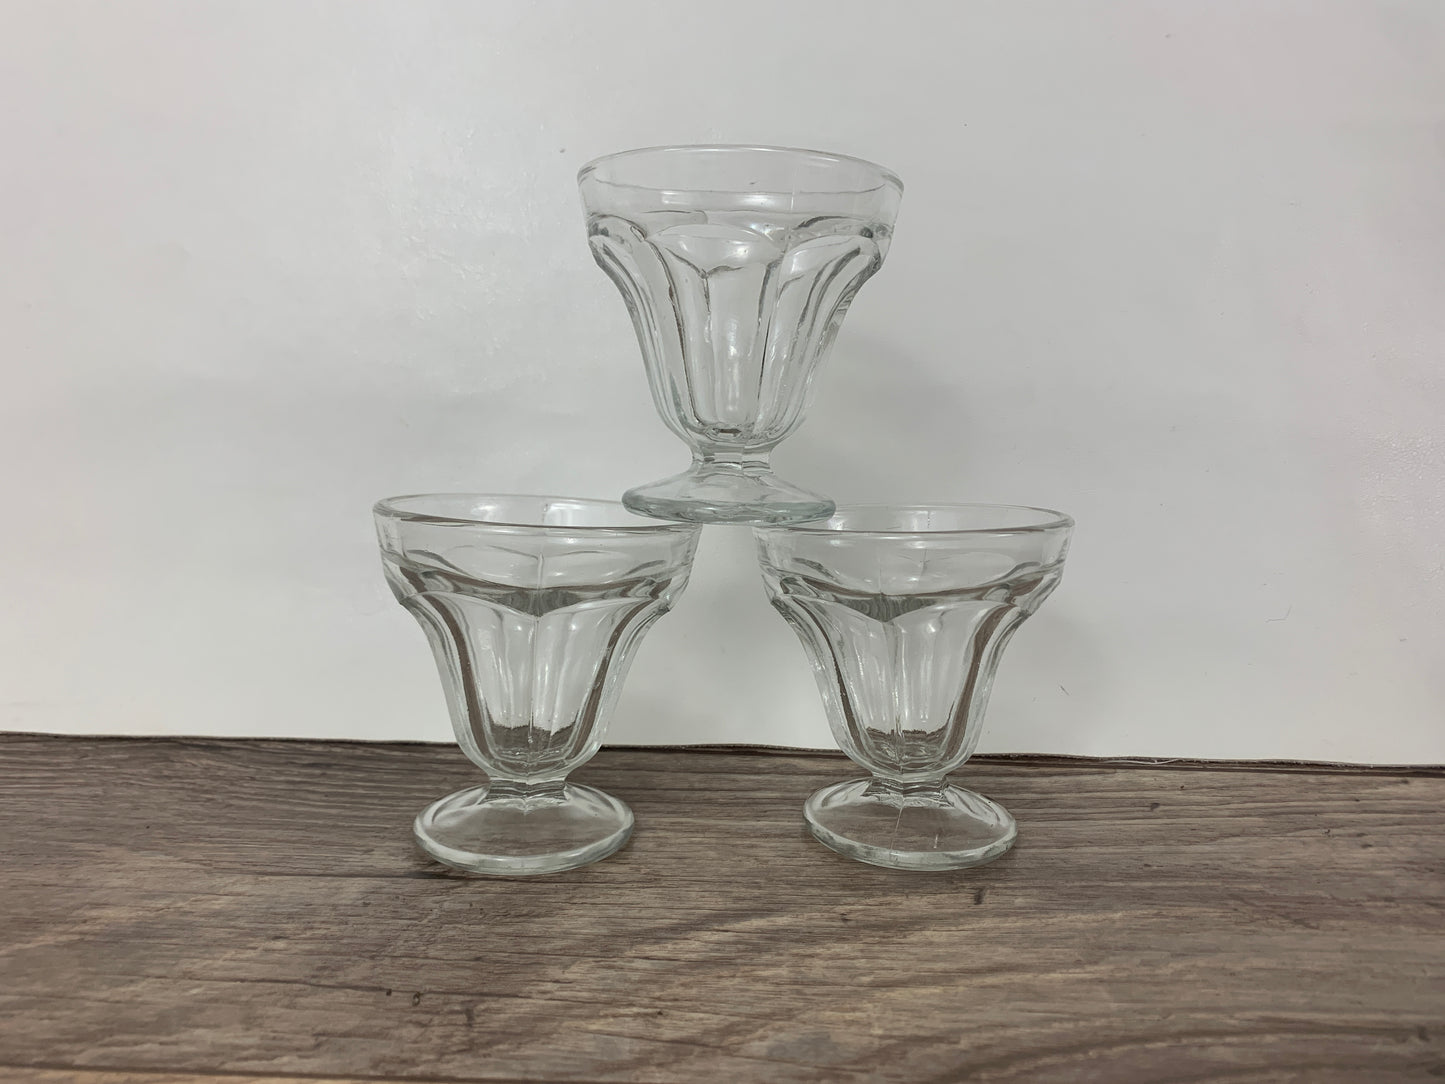 Small Sundae Cups, Vintage Clear Glass Ice Cream Cups, Set of 3 Small Ice Cream Glasses